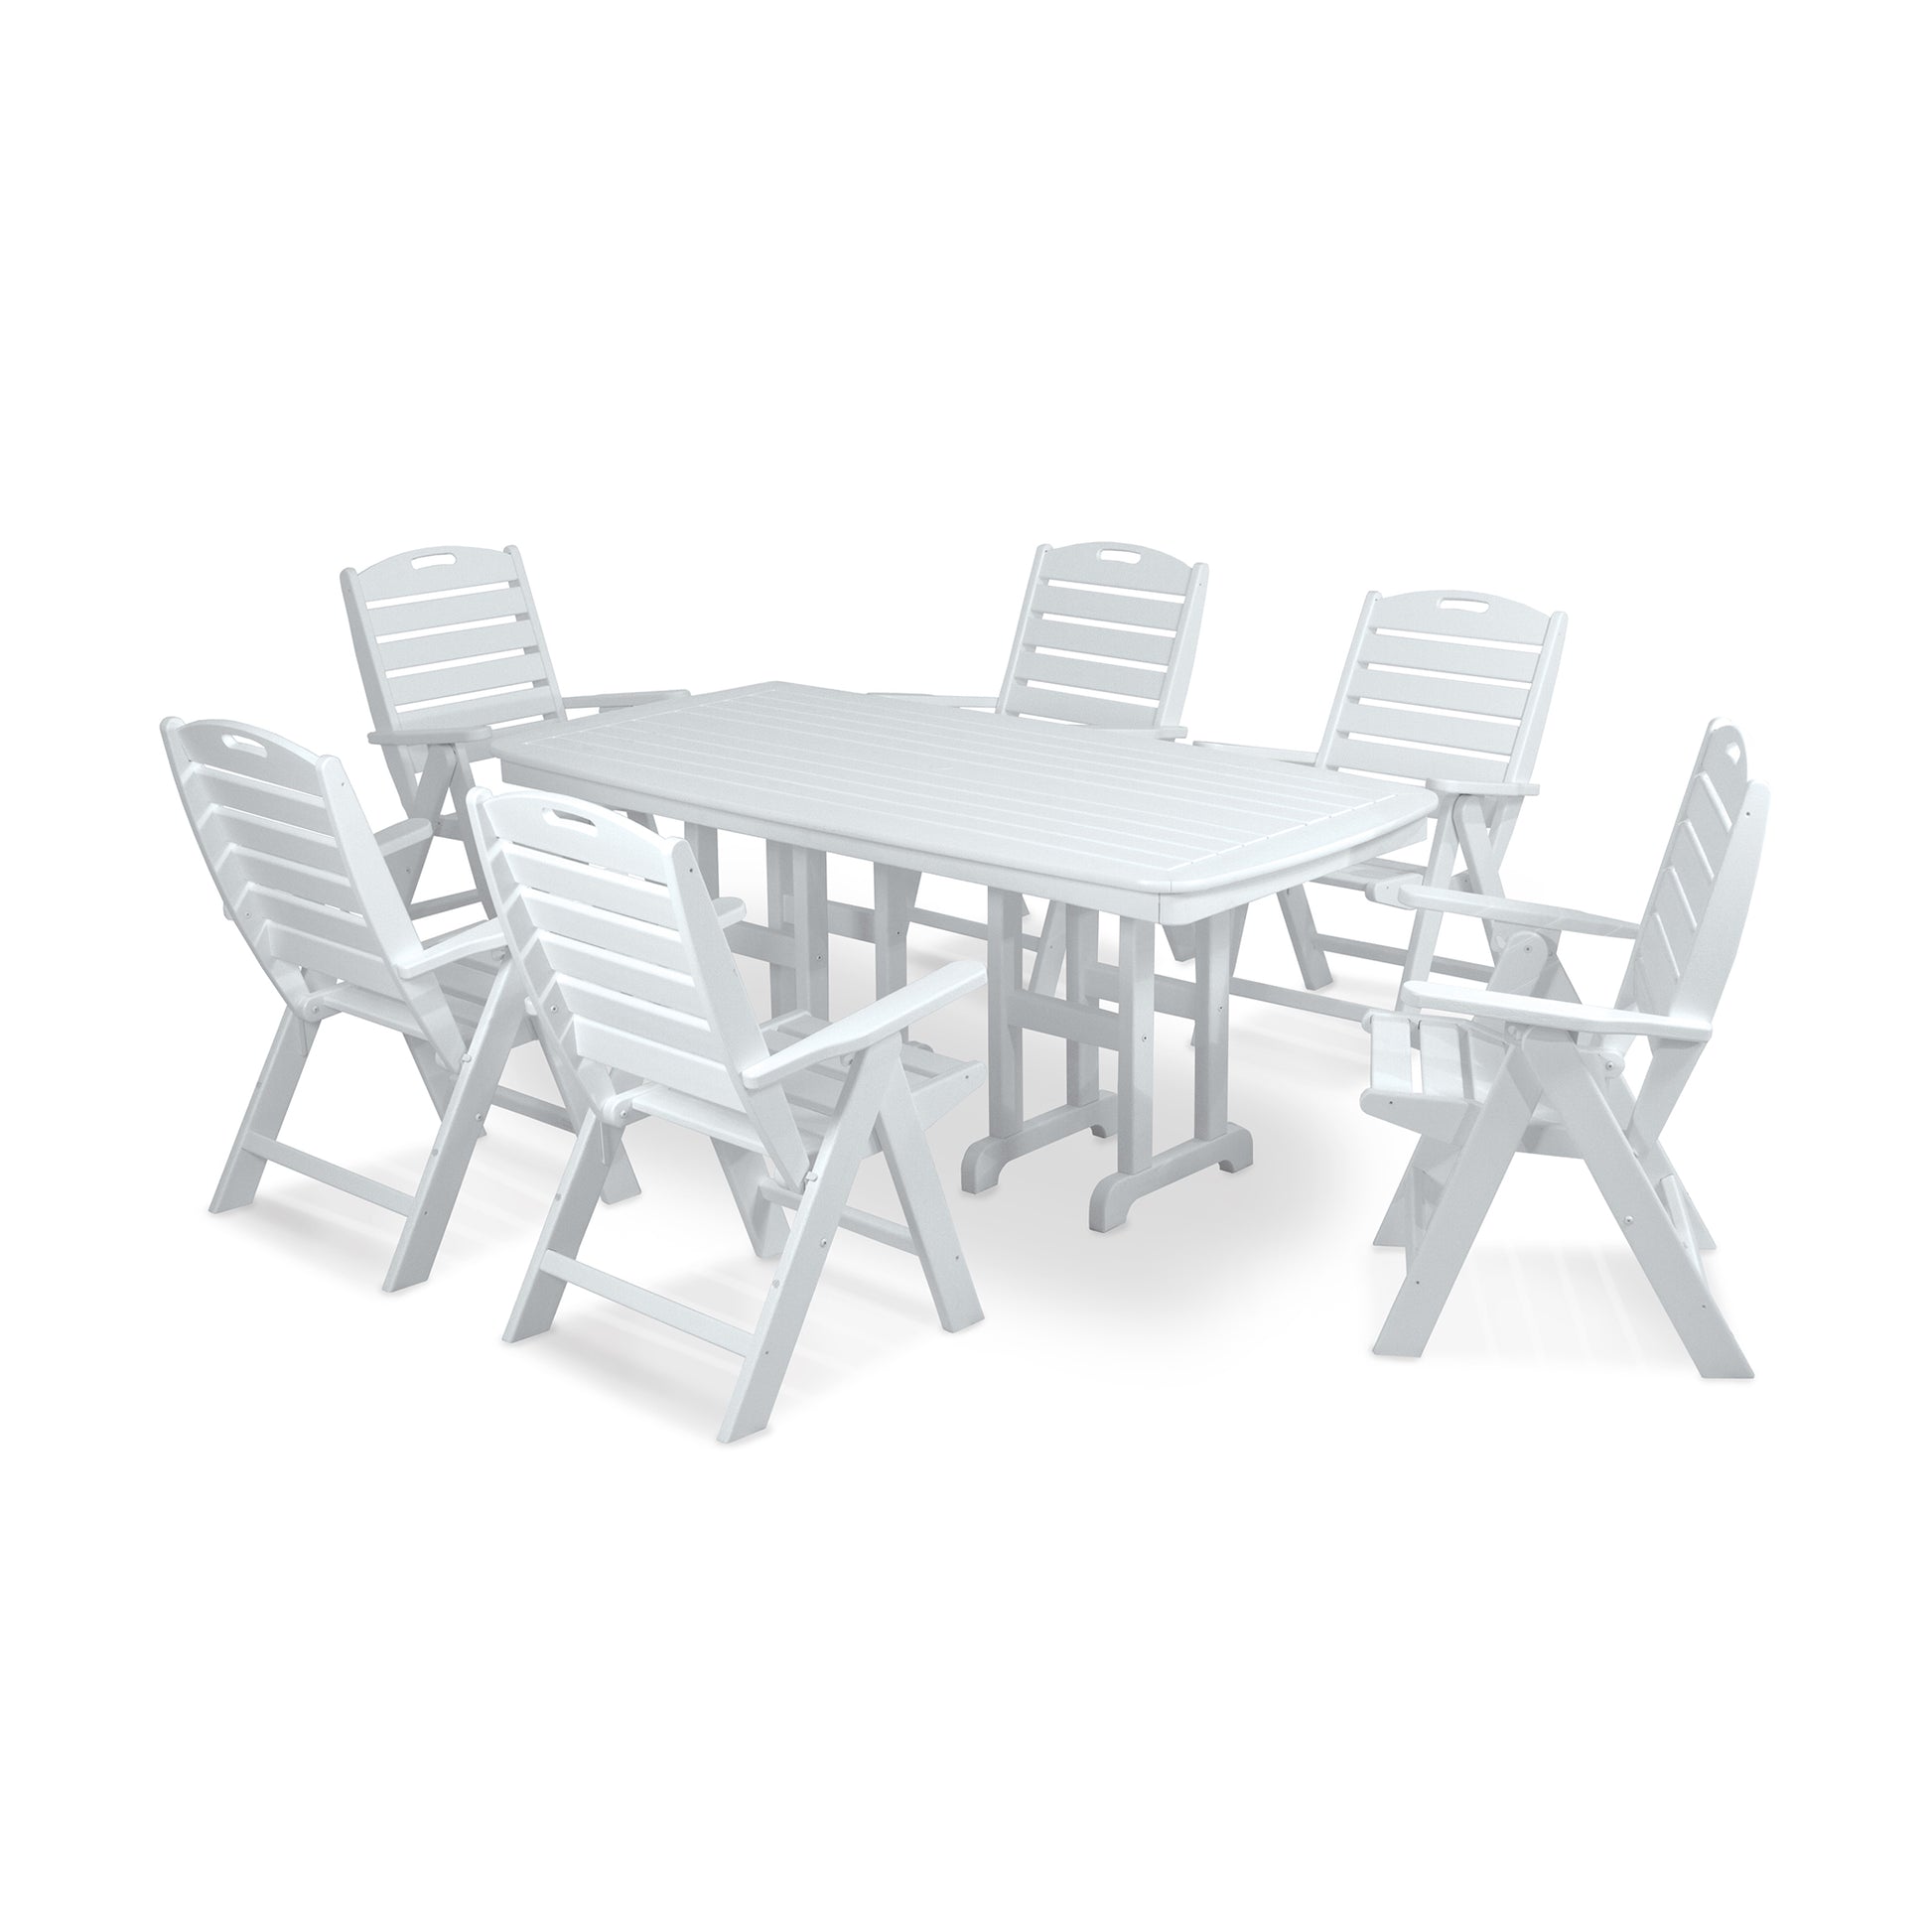 A POLYWOOD® Nautical 7-Piece Dining Set, with six chairs arranged neatly around a rectangular table, all set against a plain white background. The chairs and table appear made of durable POLYWOOD®.